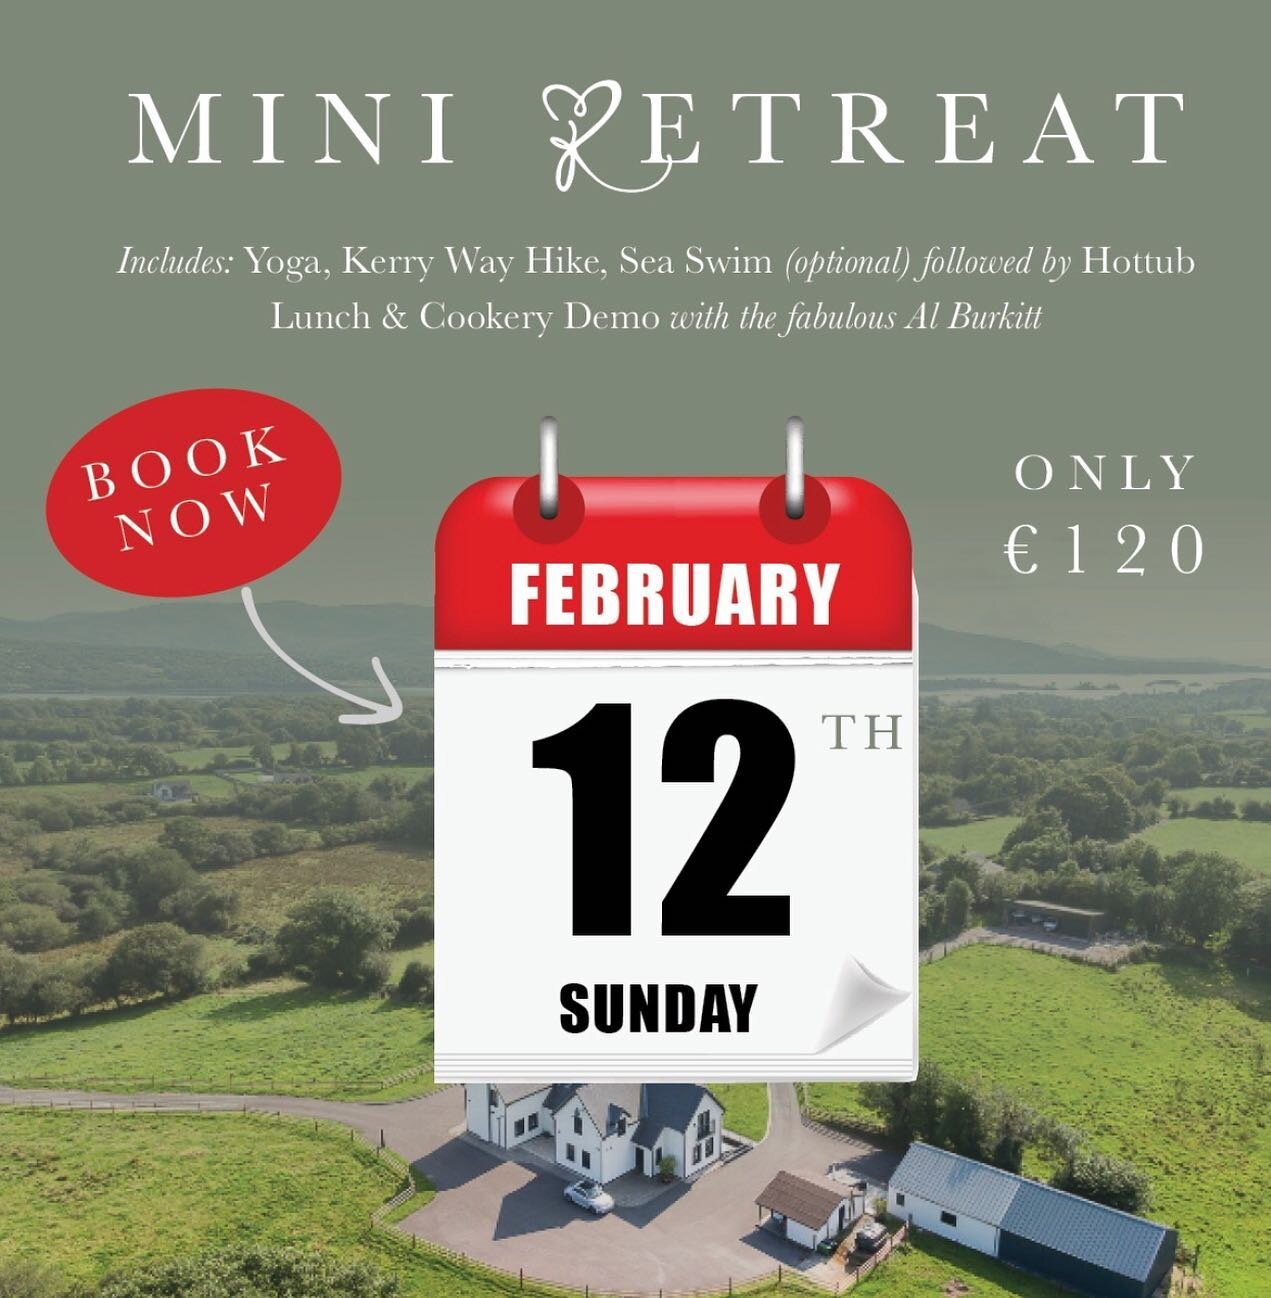 Our next Mini Retreat is March 12th! This is the last mini retreat before the summer. 
We only have a few spots left so please book early to avoid disappointment. 

Itinerary:
9am welcome 
9.15 yoga 
10.30 Kerry Way Hike 
Sea Swim (optional)
Followed